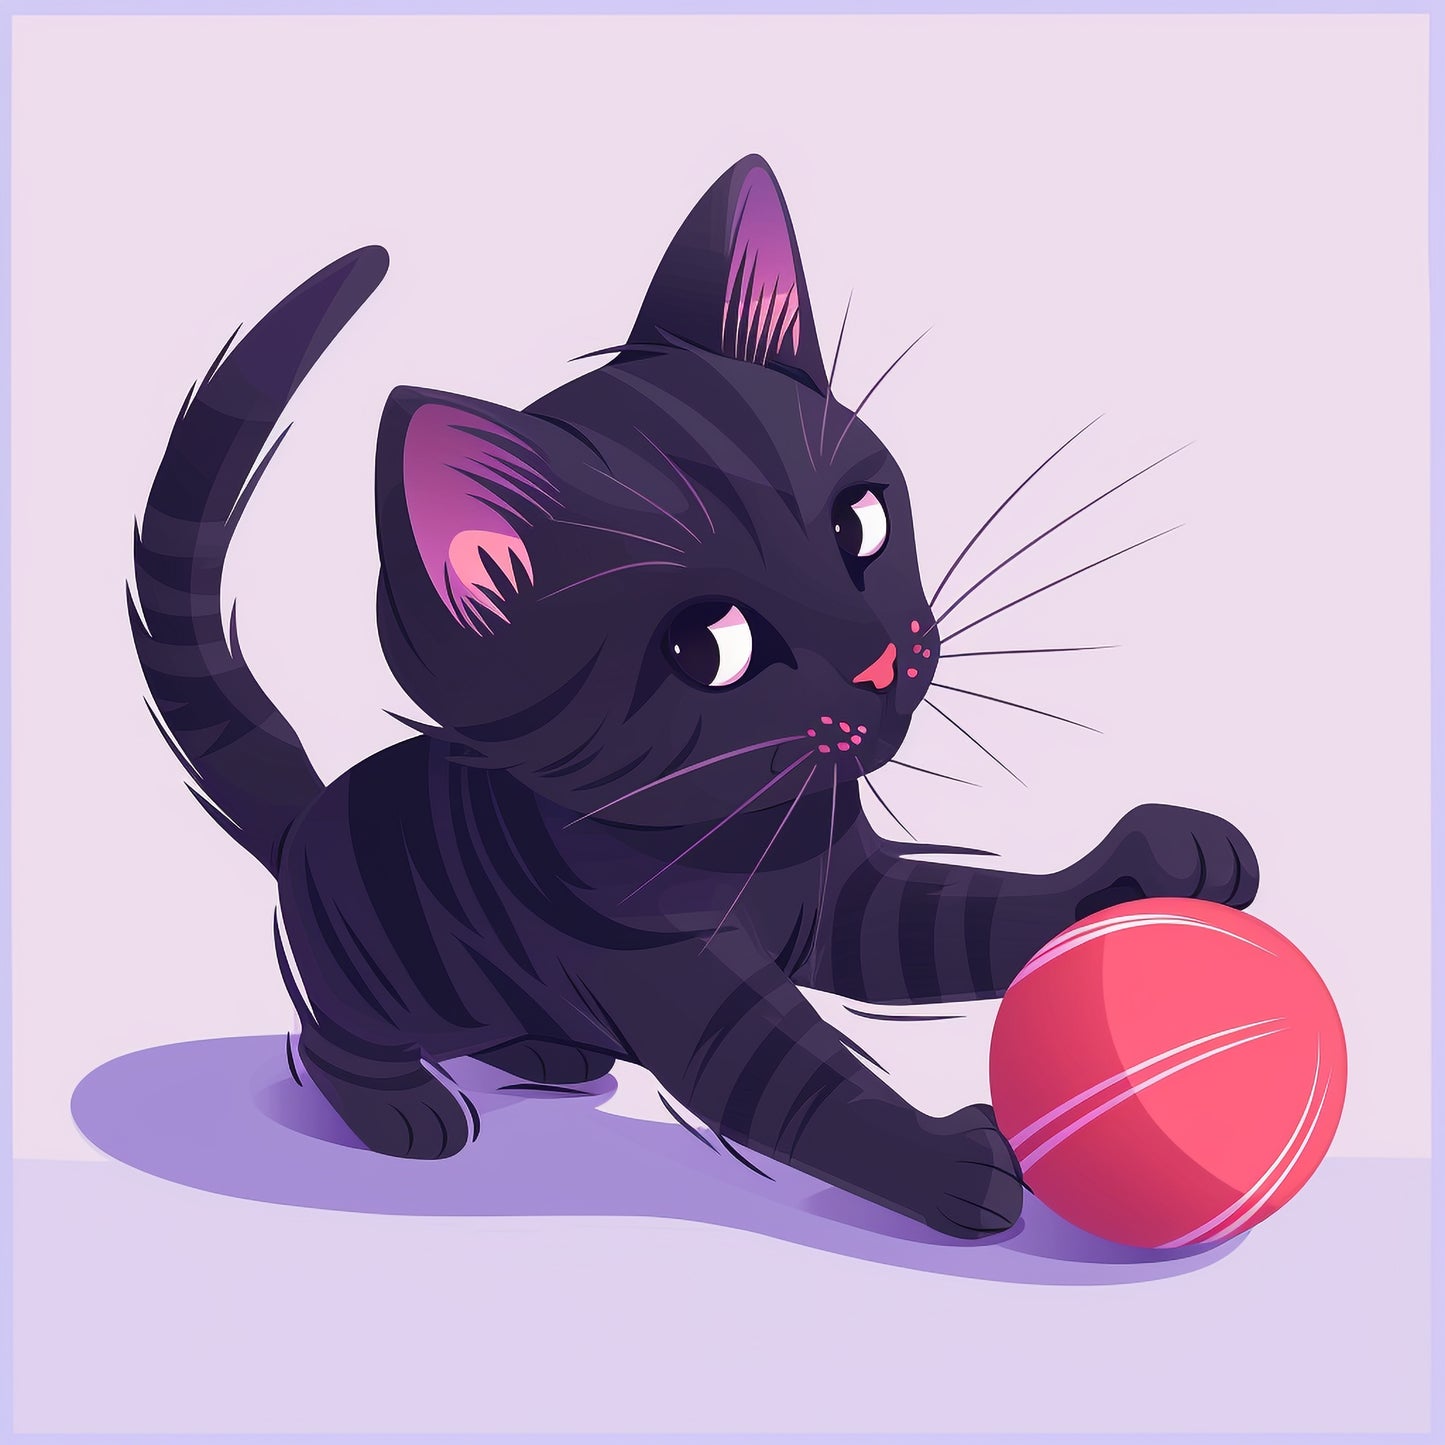 Playful Kitten Enjoying A Game With A Bright Red Ball